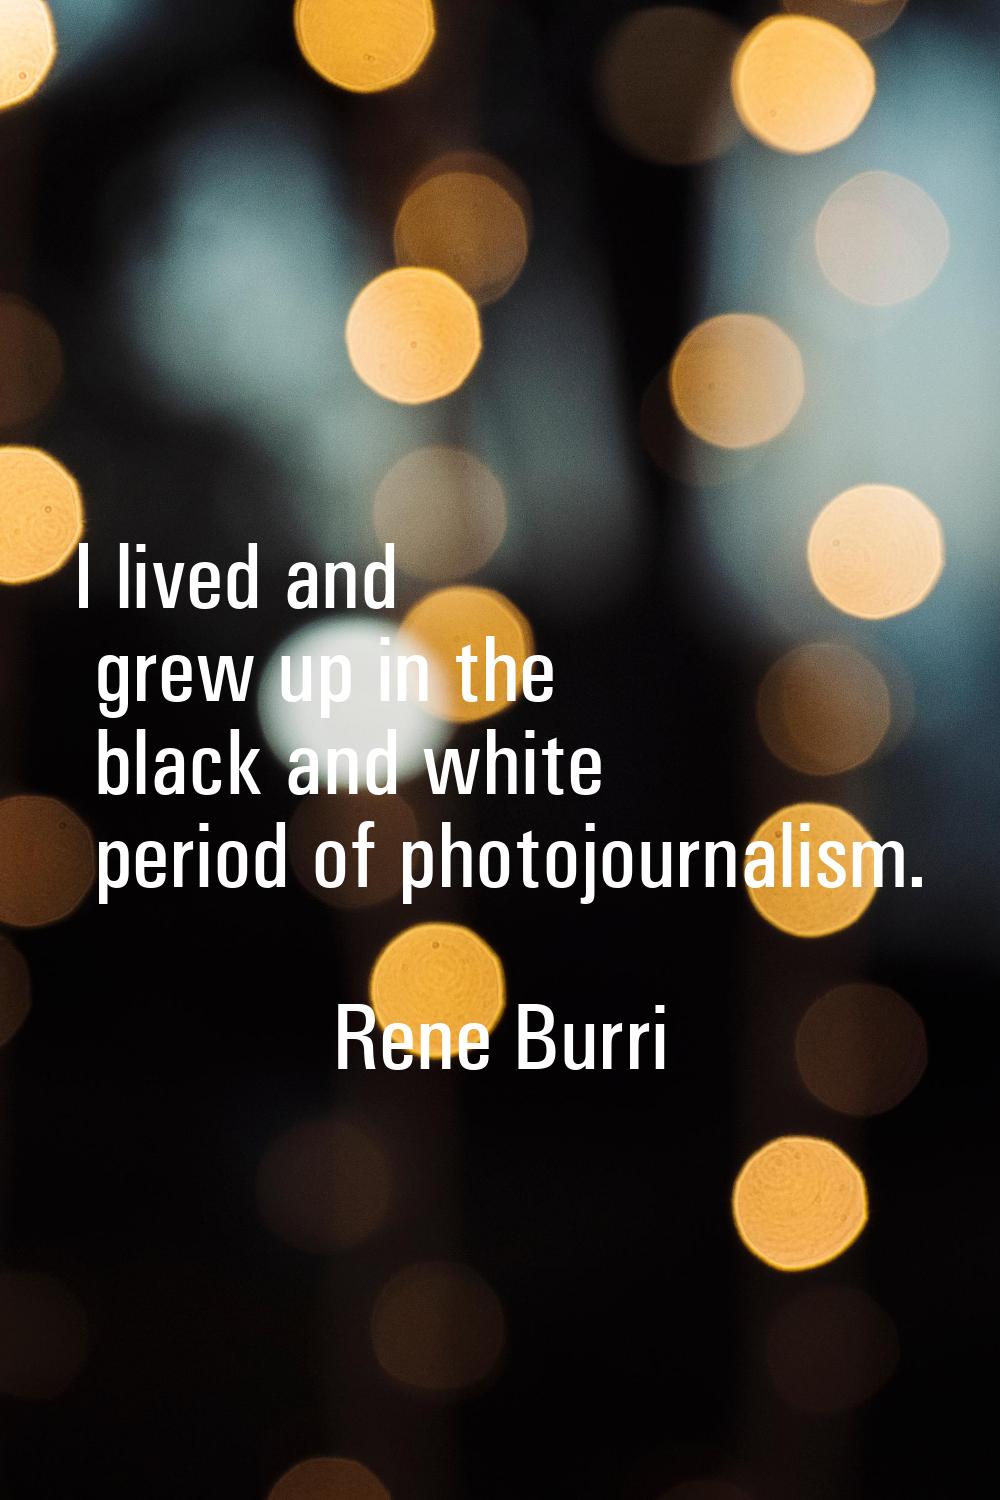 I lived and grew up in the black and white period of photojournalism.